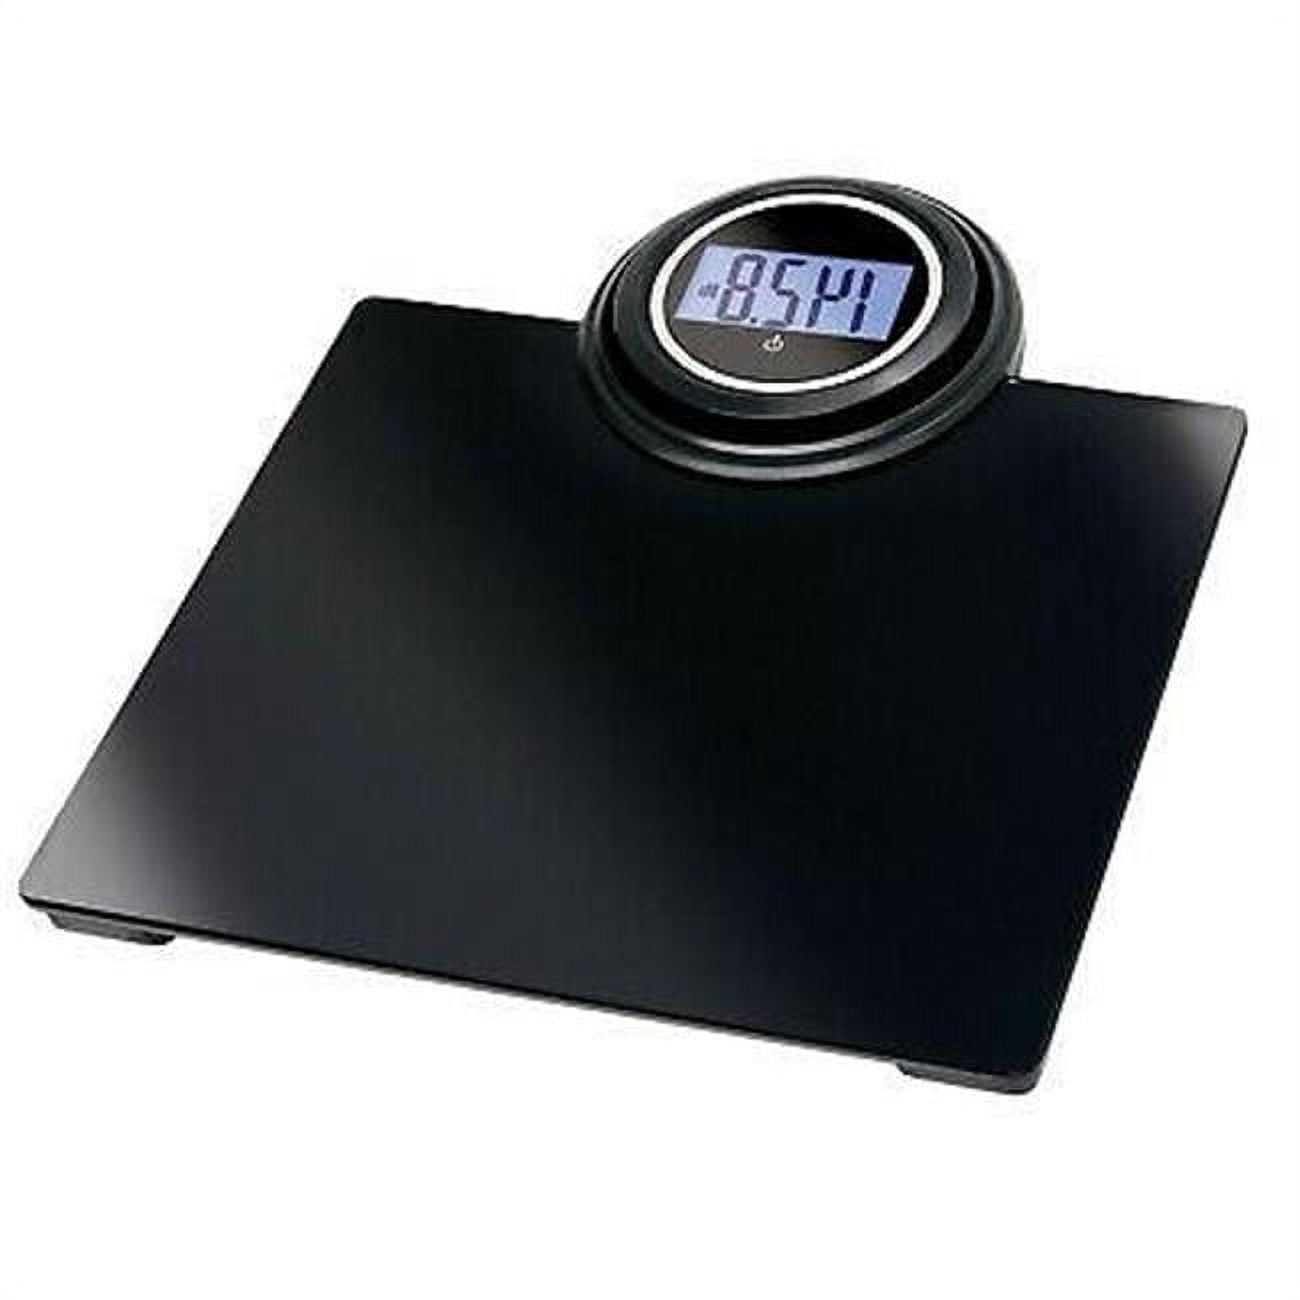 Digital Scale For Body Weight - Cordless Battery-operated Bathroom  Accessory With Large Lcd Display To Track Health And Fitness By Bluestone  (black) : Target